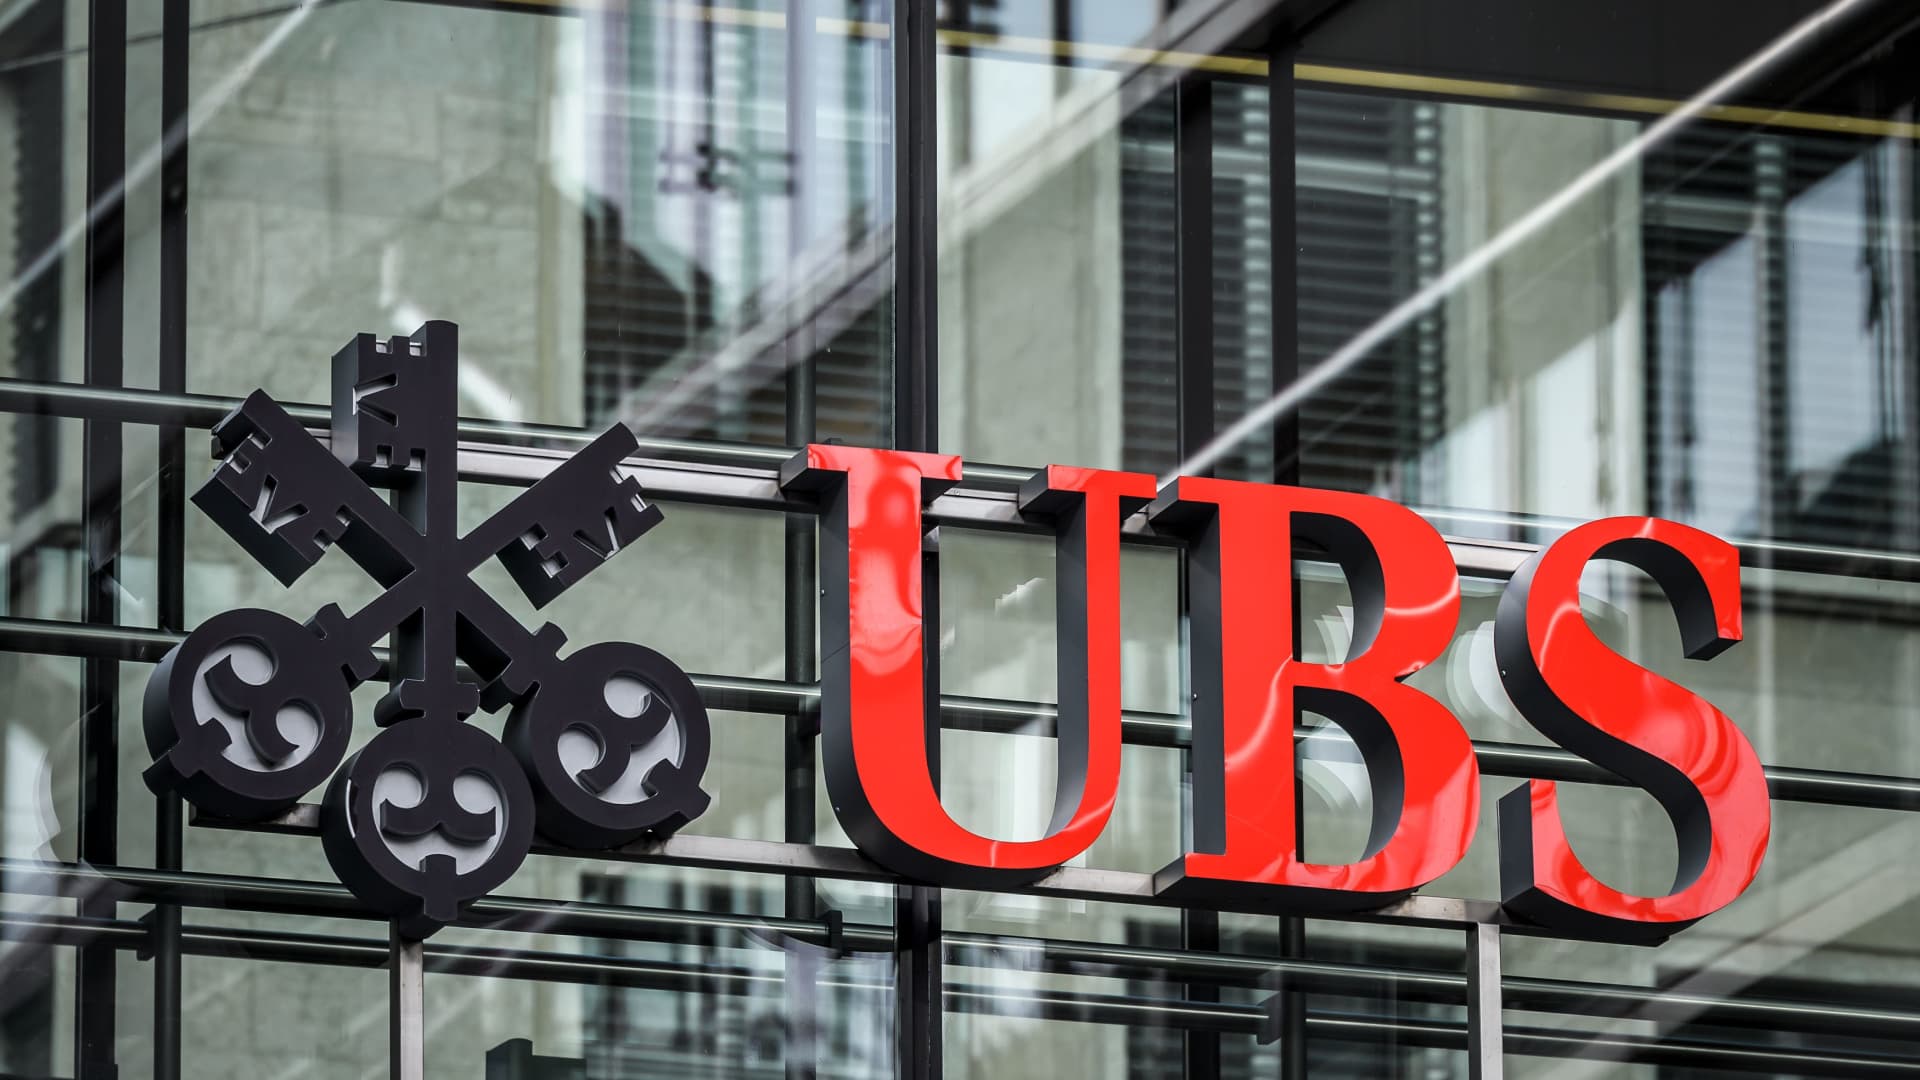 A sign of Swiss banking giant UBS is seen at a branch in Zurich on October 26, 2018.